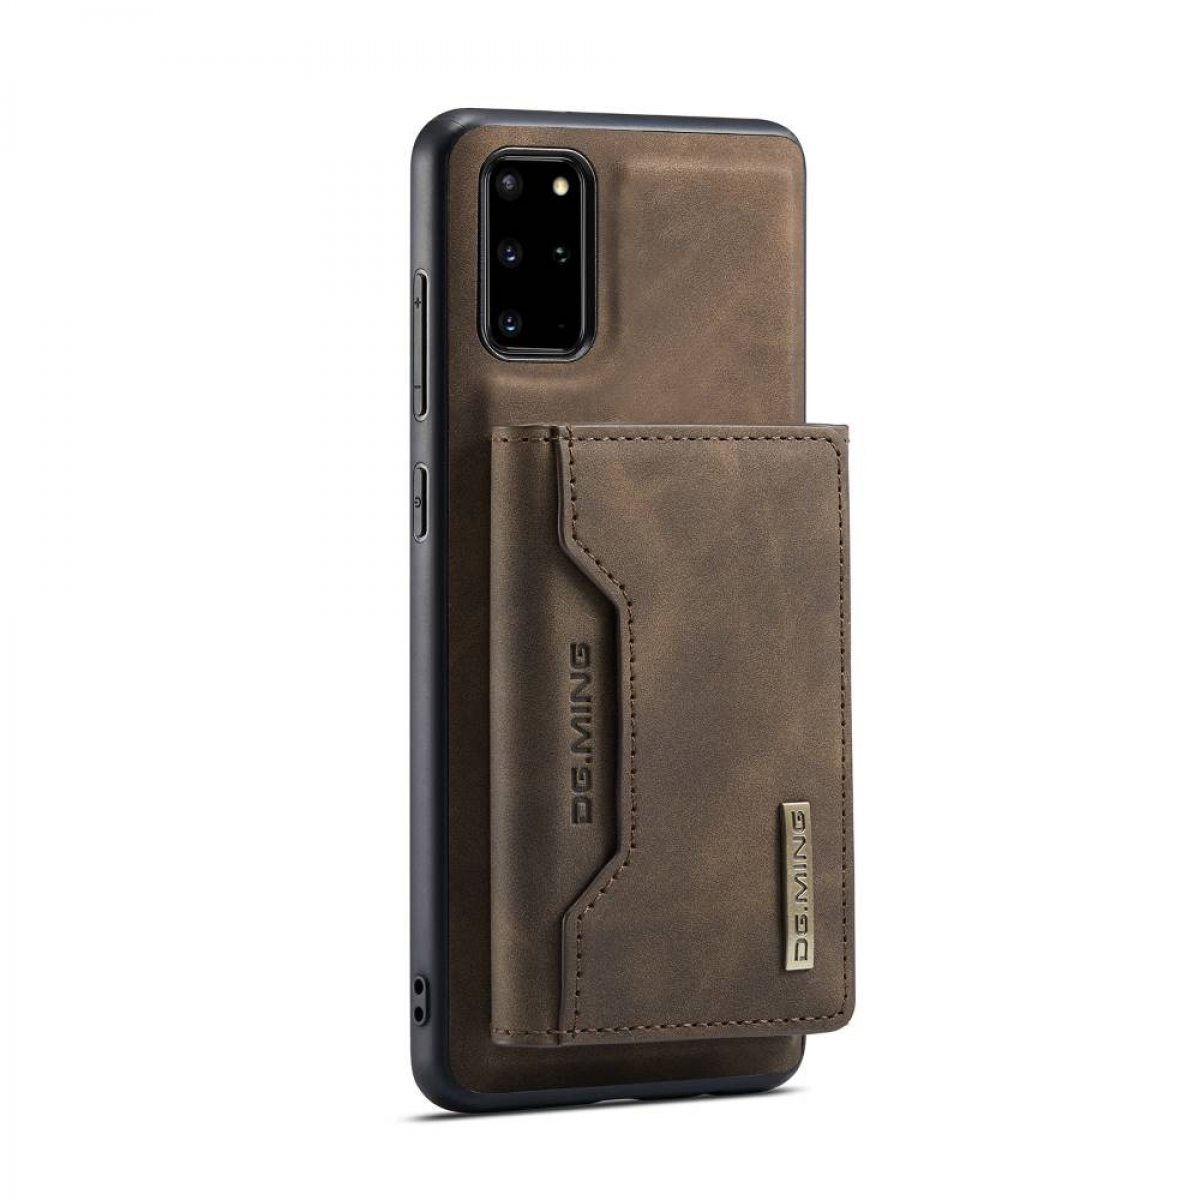 DG Backcover, Plus, S20 MING Galaxy M2 2in1, Samsung, Coffee